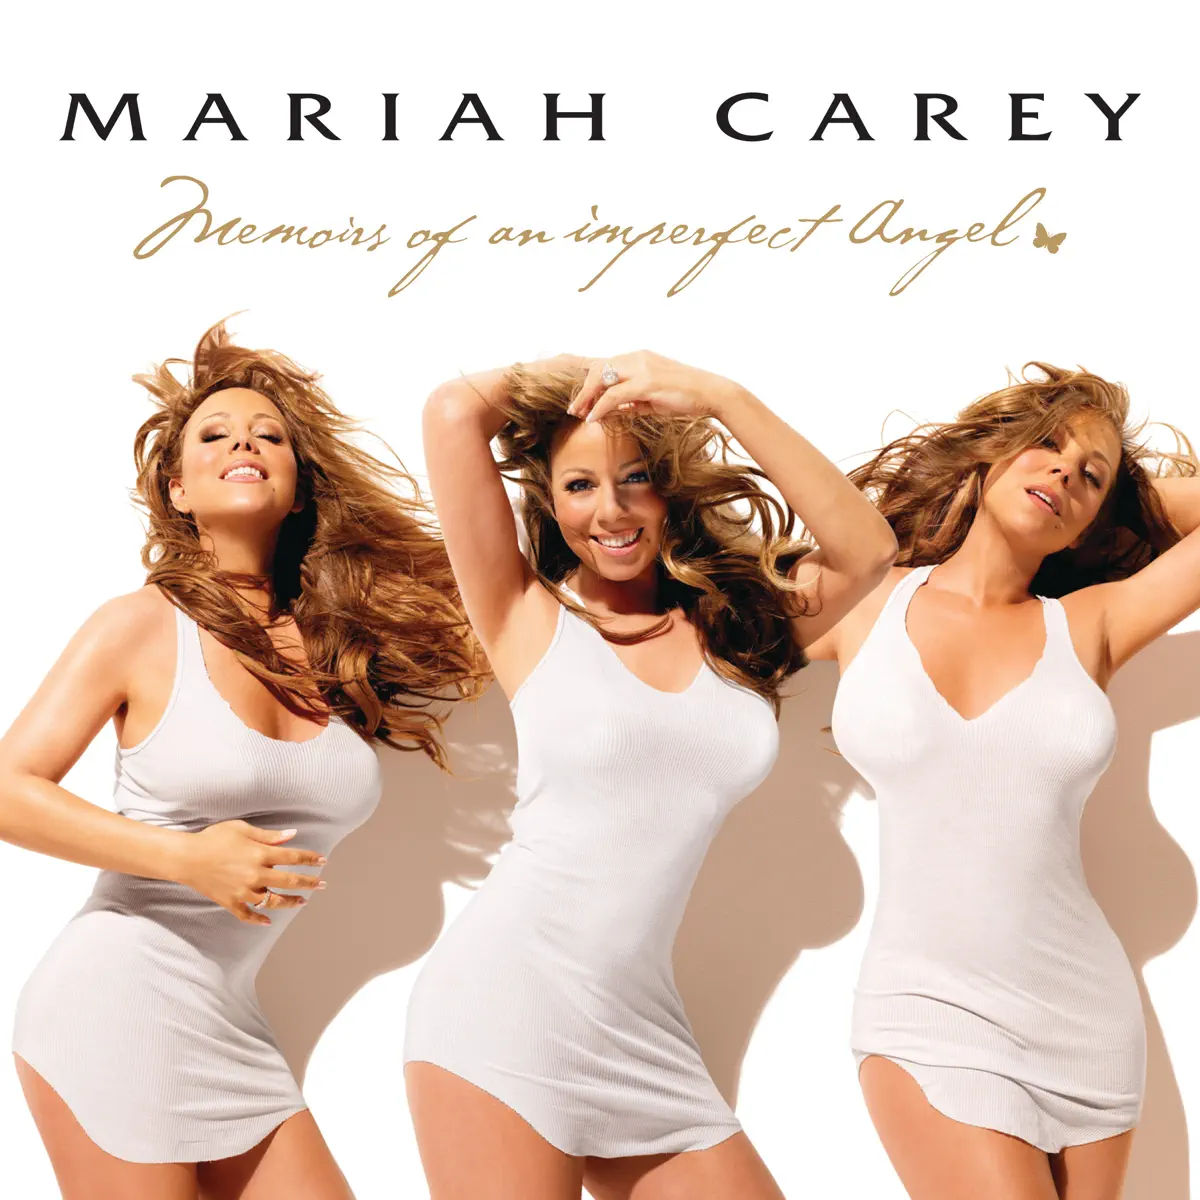 Mariah Carey - Memoirs of an Imperfect Angel (Special Edition) (2009) [iTunes Plus AAC M4A + M4V]-新房子